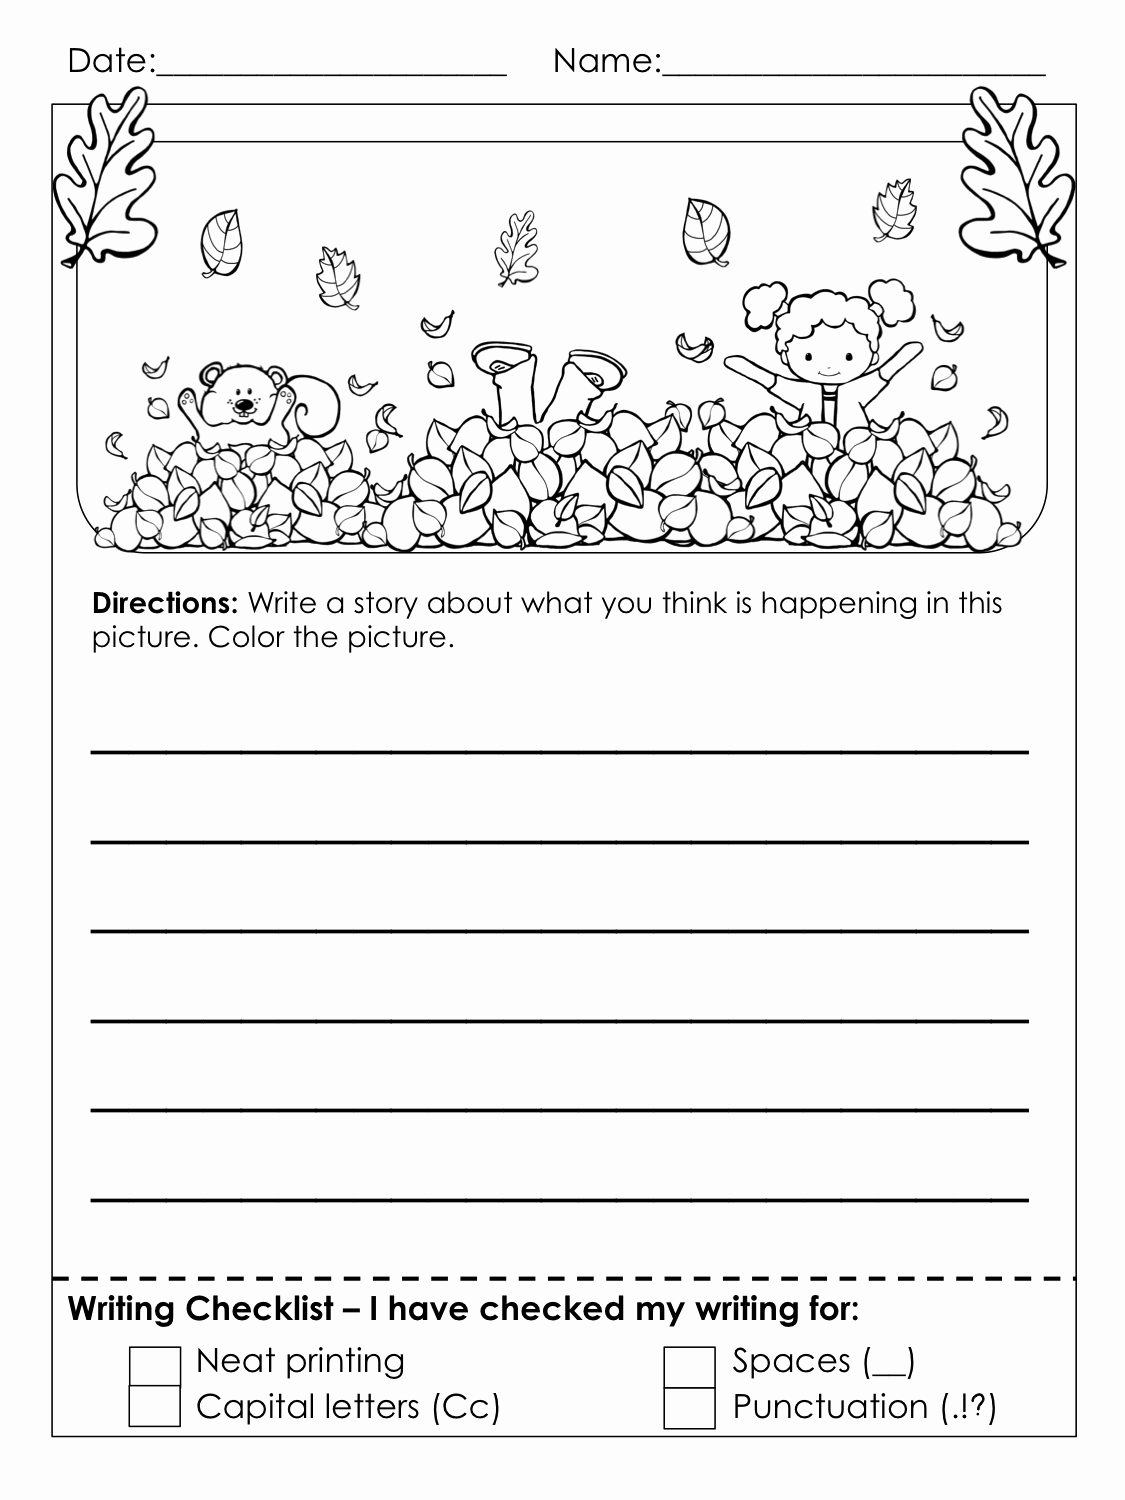 3rd Grade Essay Writing Worksheet Awesome 3rd Grade Writing Worksheets Best Coloring Pages for Kids